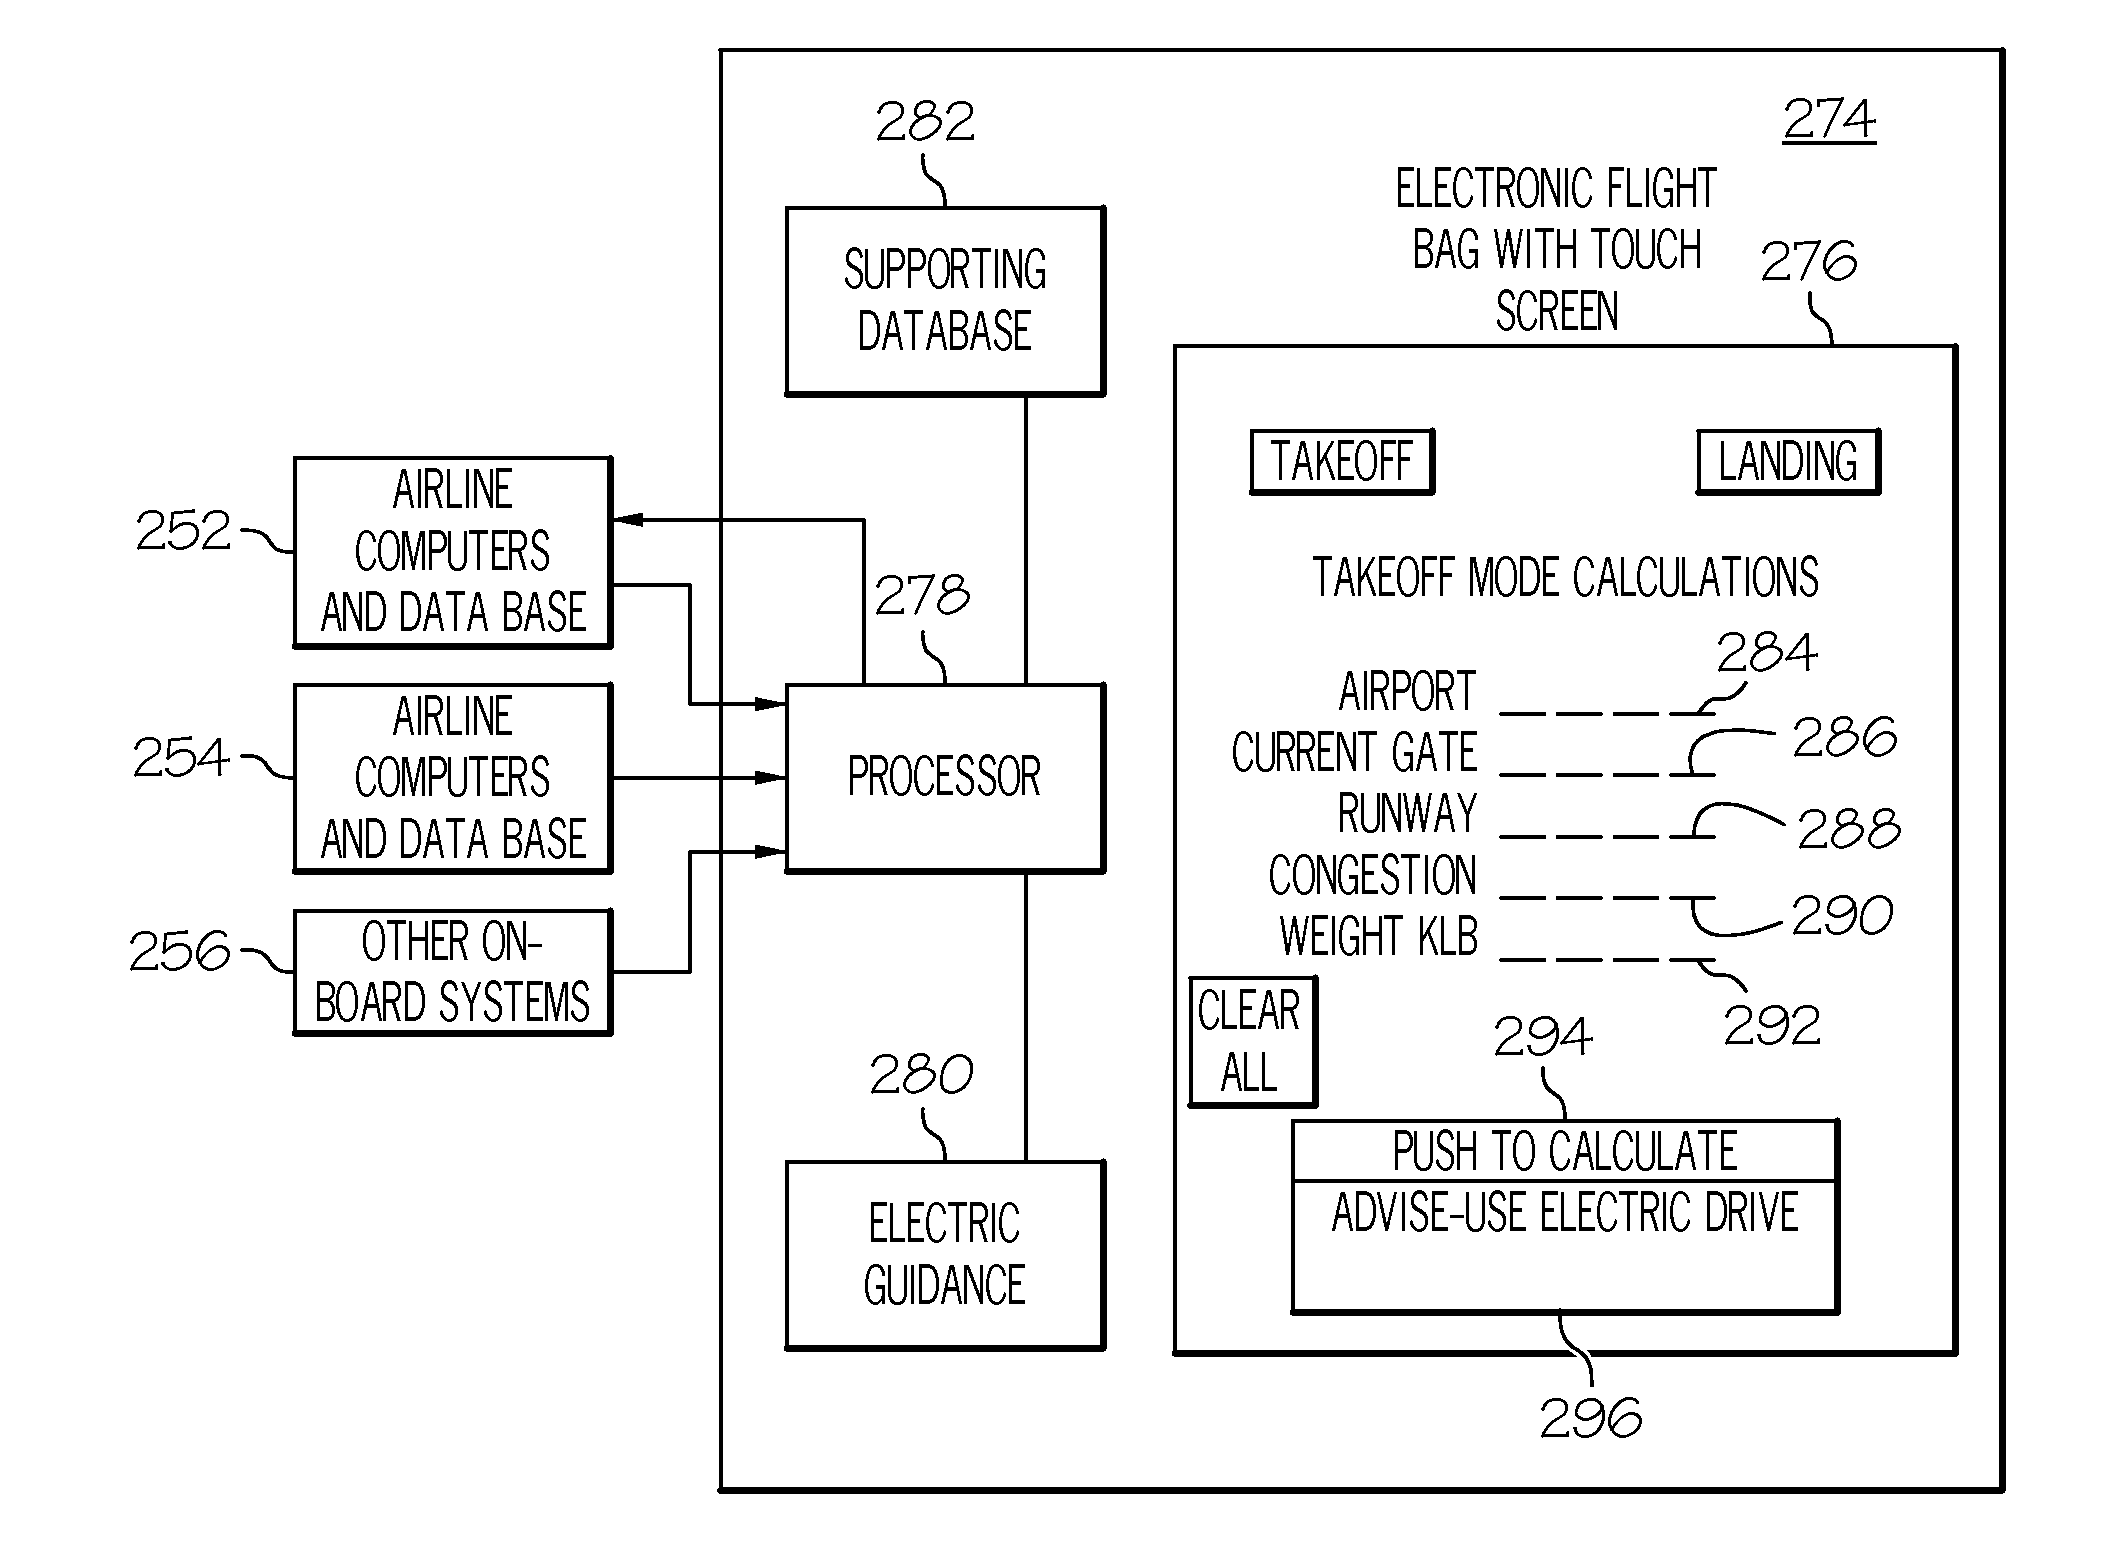 System and method for generating and displaying an electric taxi index